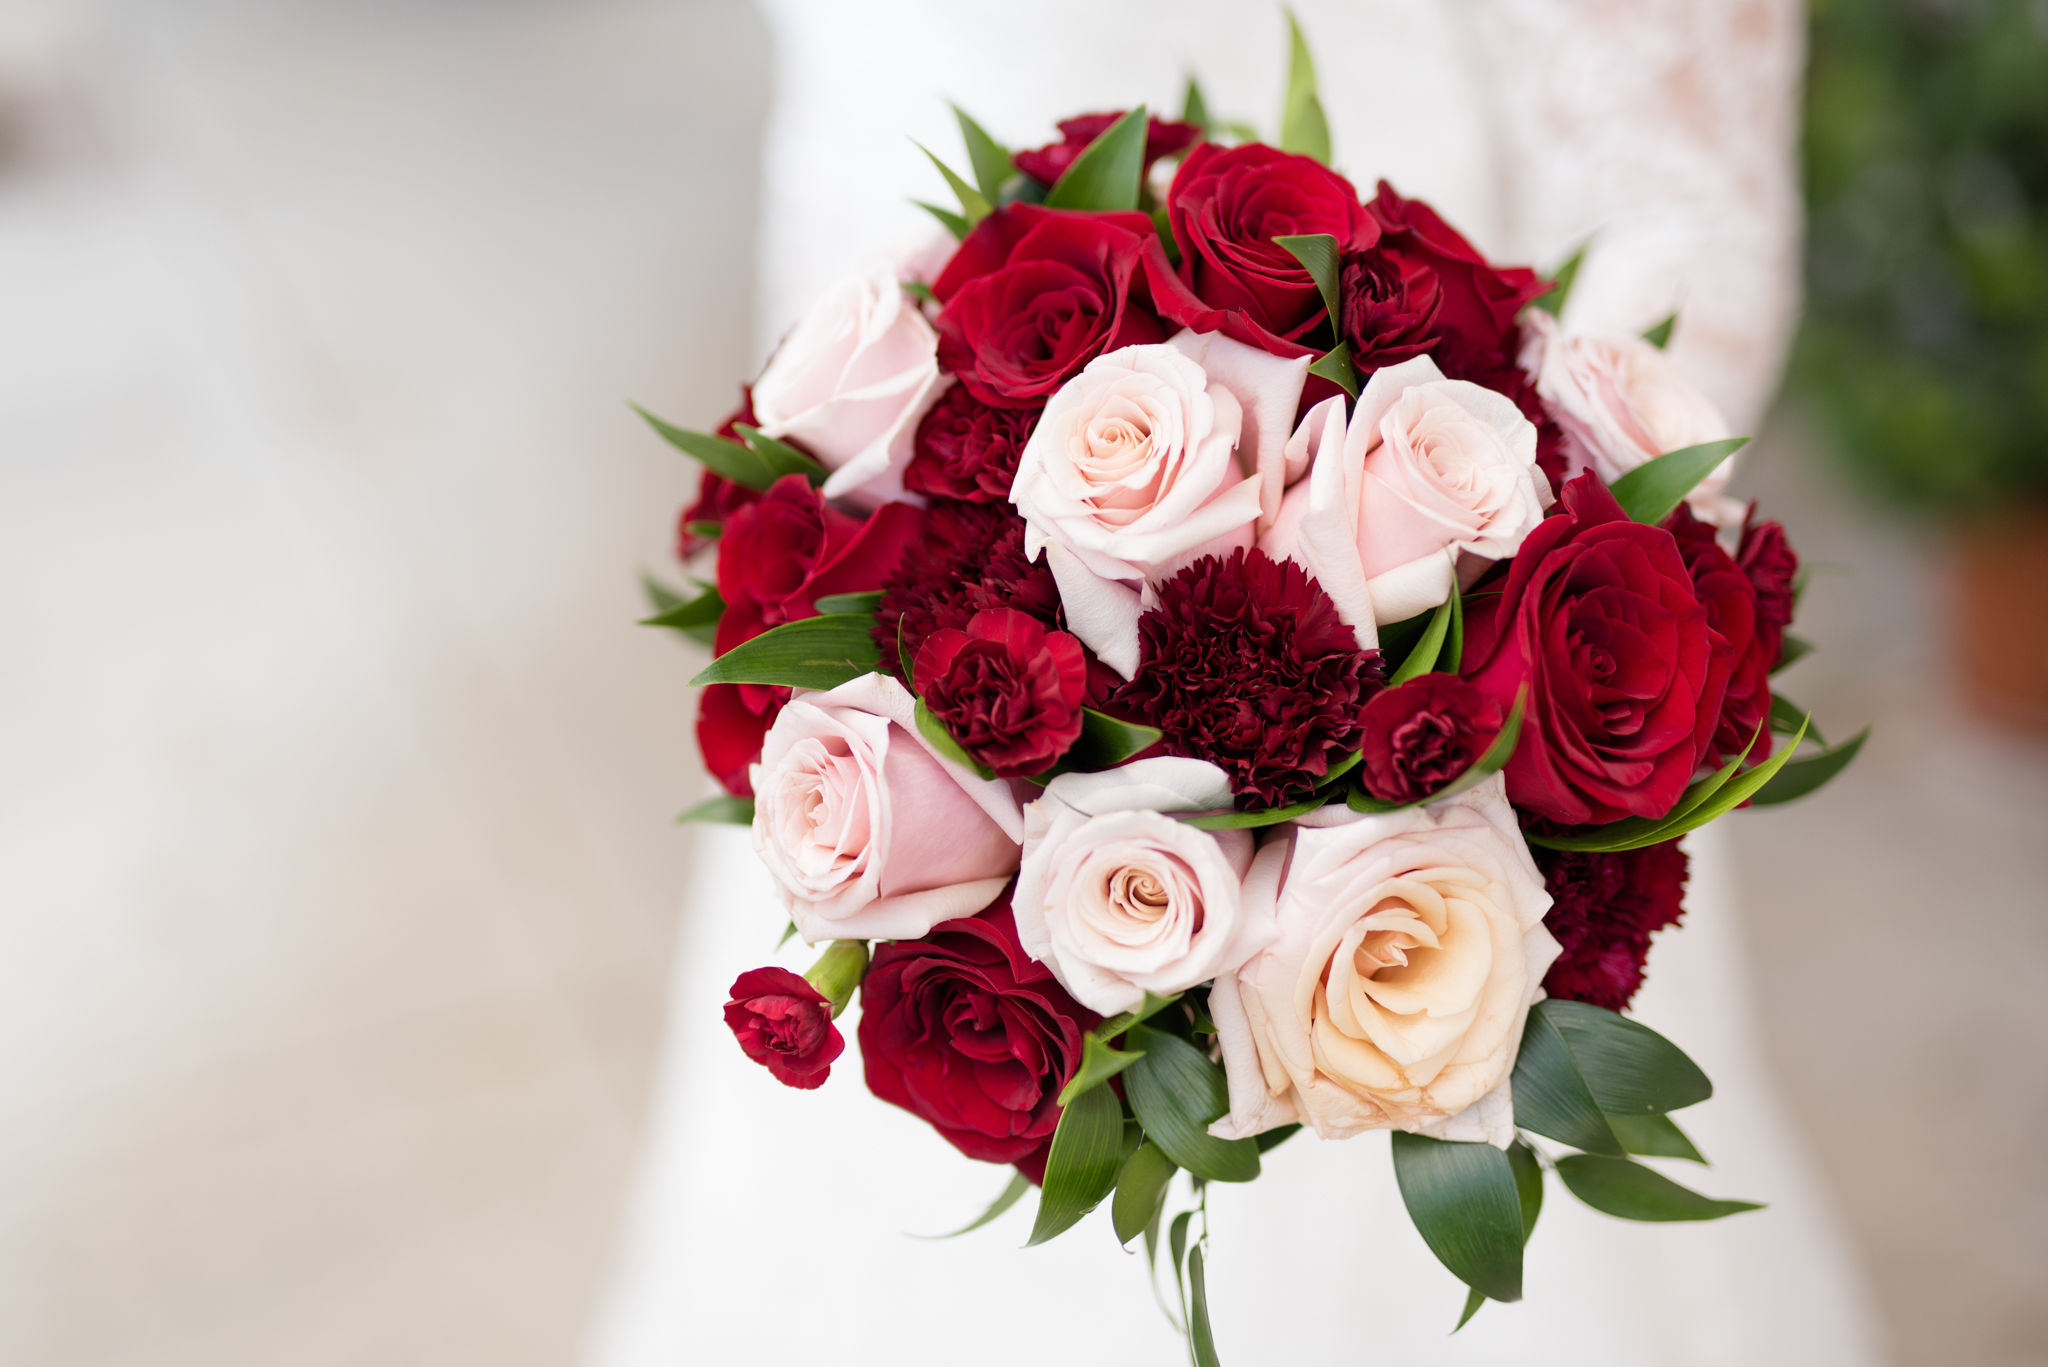 Bridal bouquet with red and pink roses.